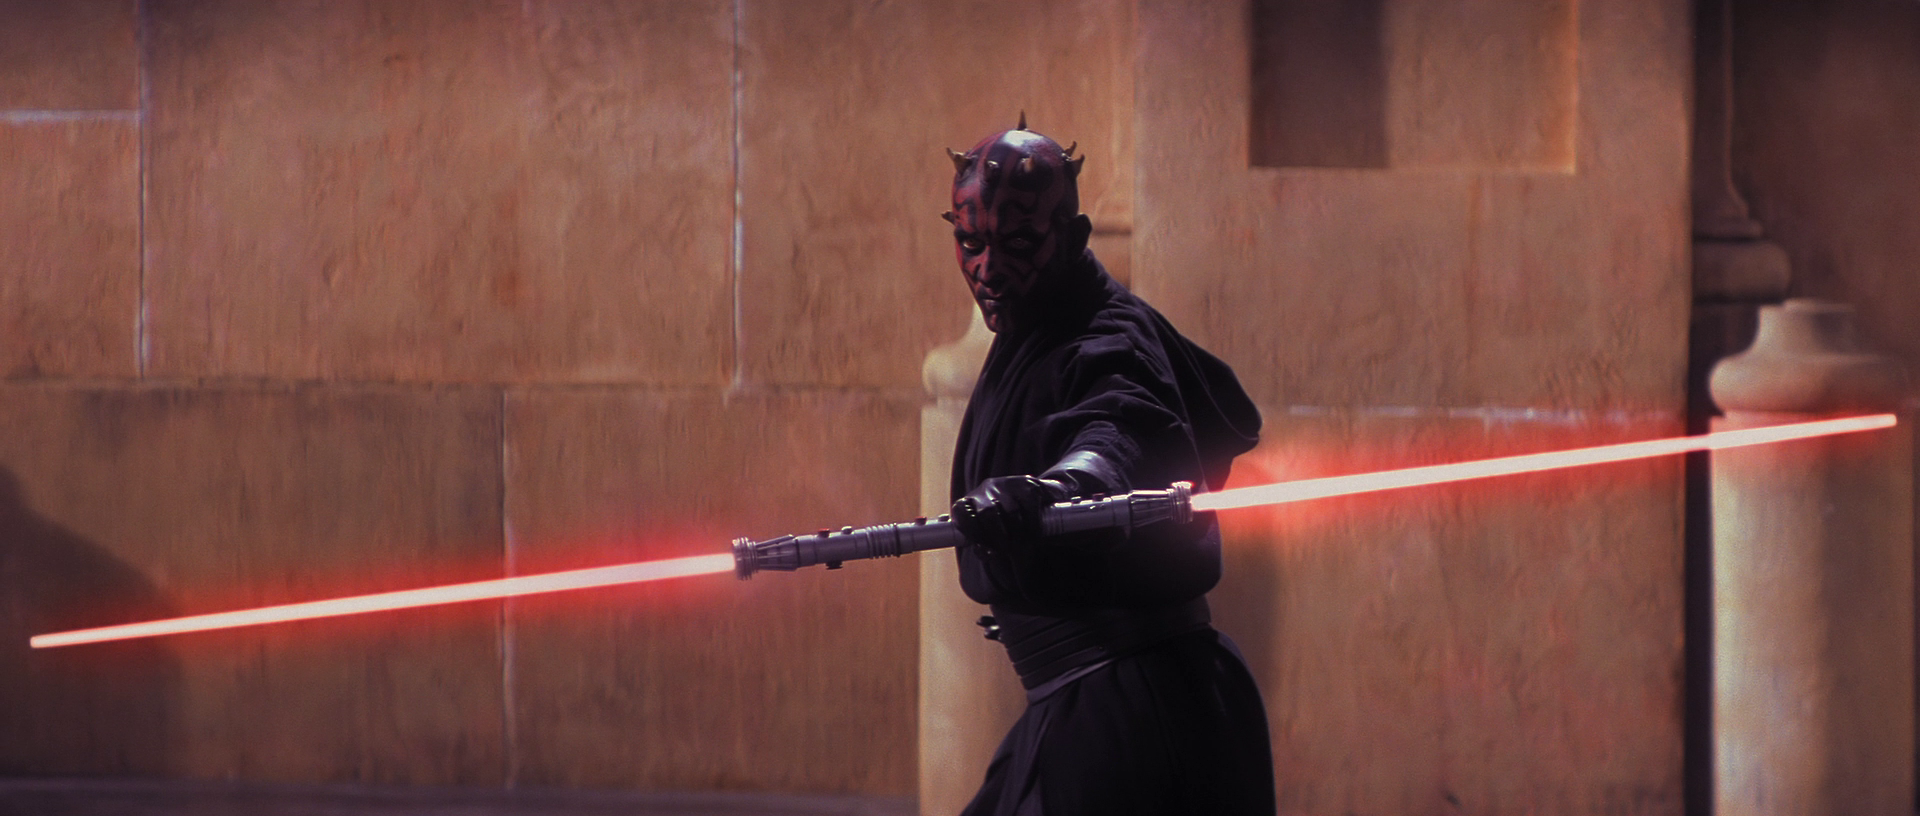 https://vignette.wikia.nocookie.net/starwars/images/1/1a/Darth_Maul_lightsaber_reveal.png/revision/latest?cb=20140421143551